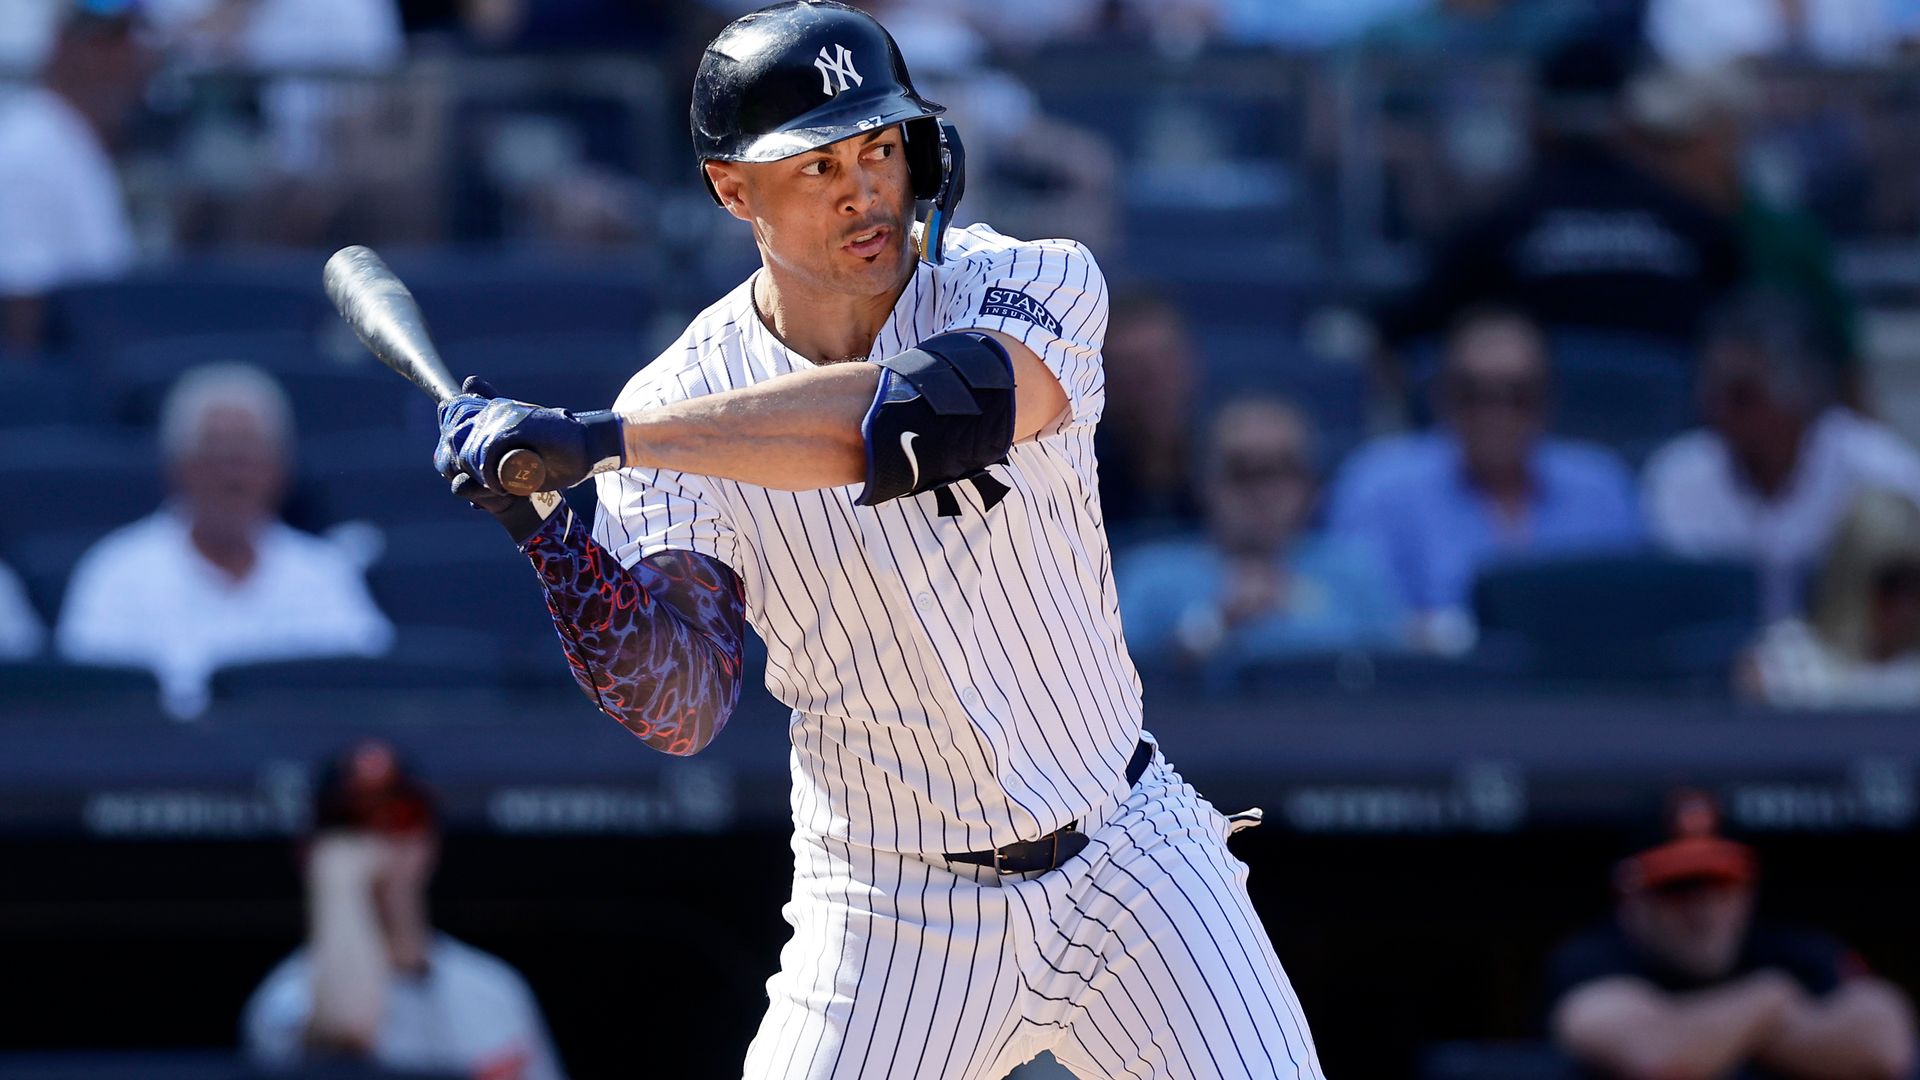 Giancarlo Stanton's romance with Asiana Hung-Barnes: A swing and a miss